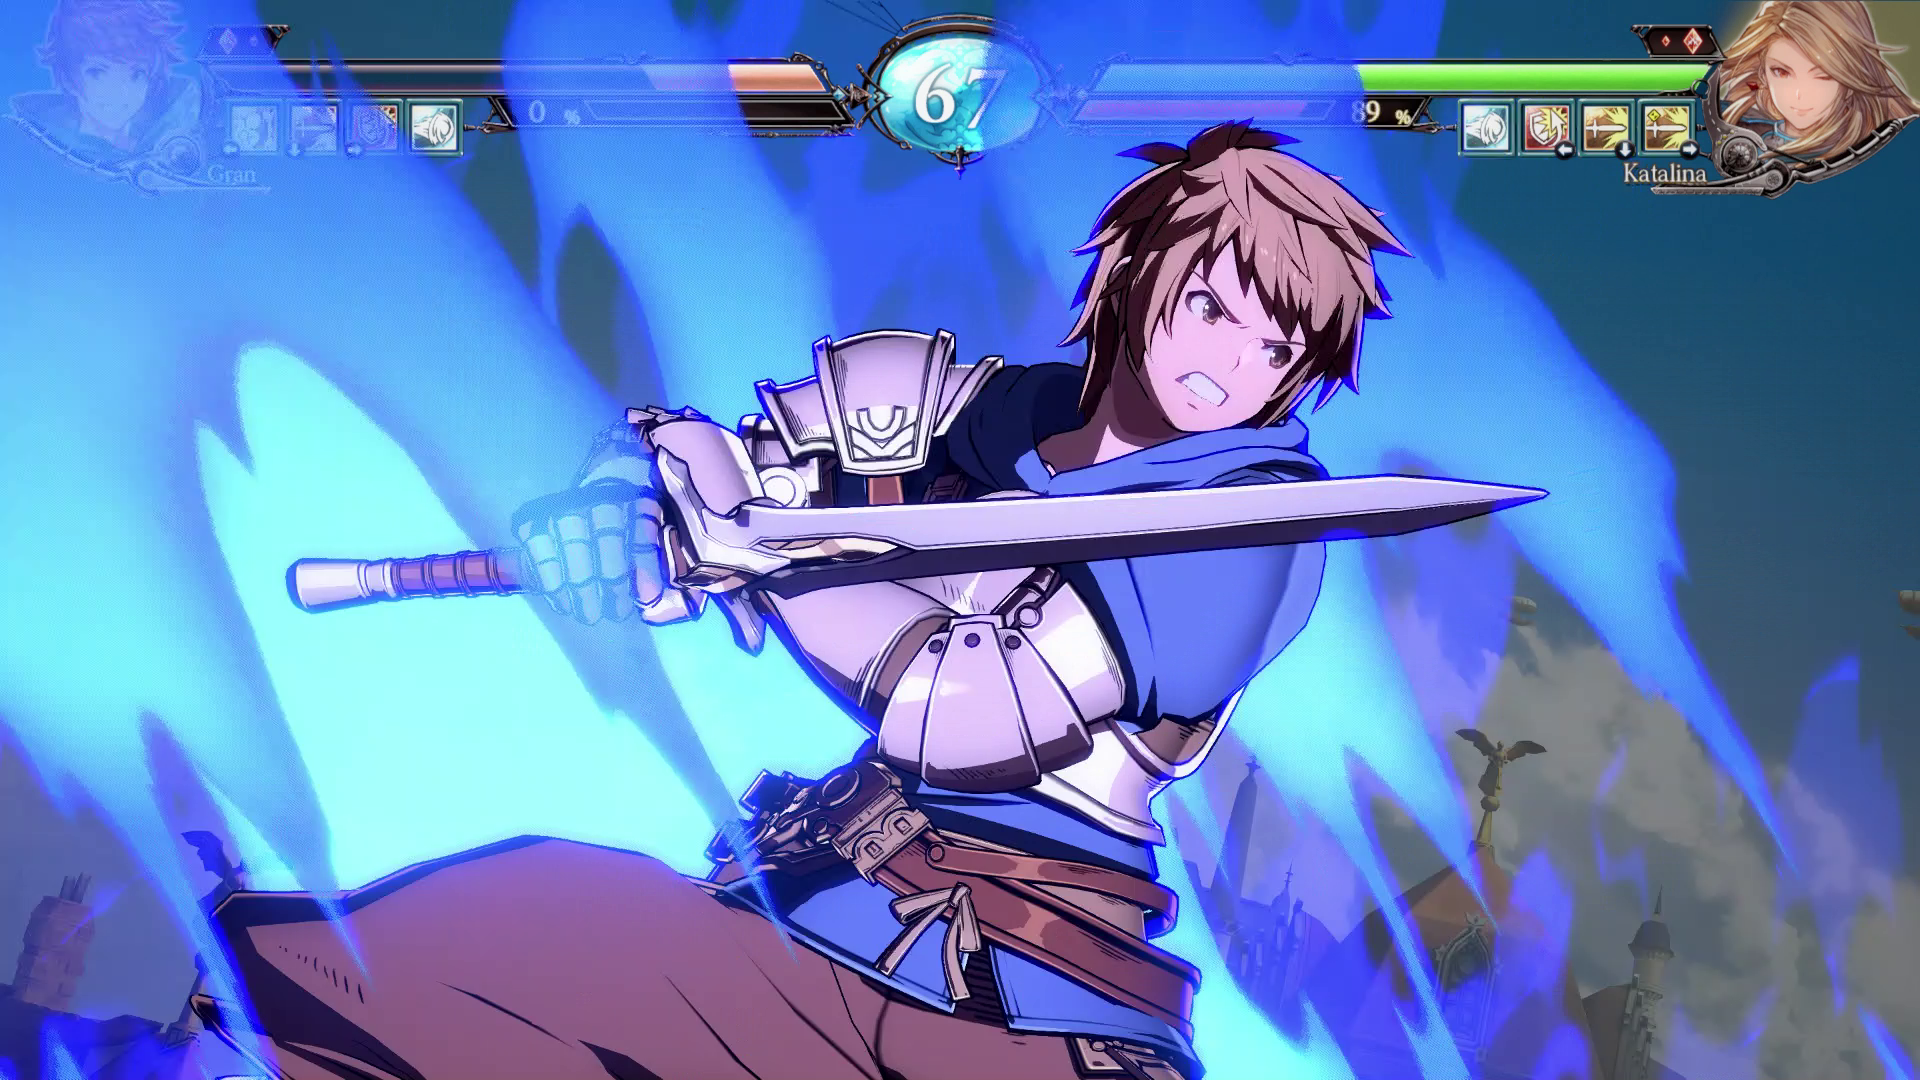 Granblue Fantasy: Versus to Launch March 3 on PlayStation®4 in